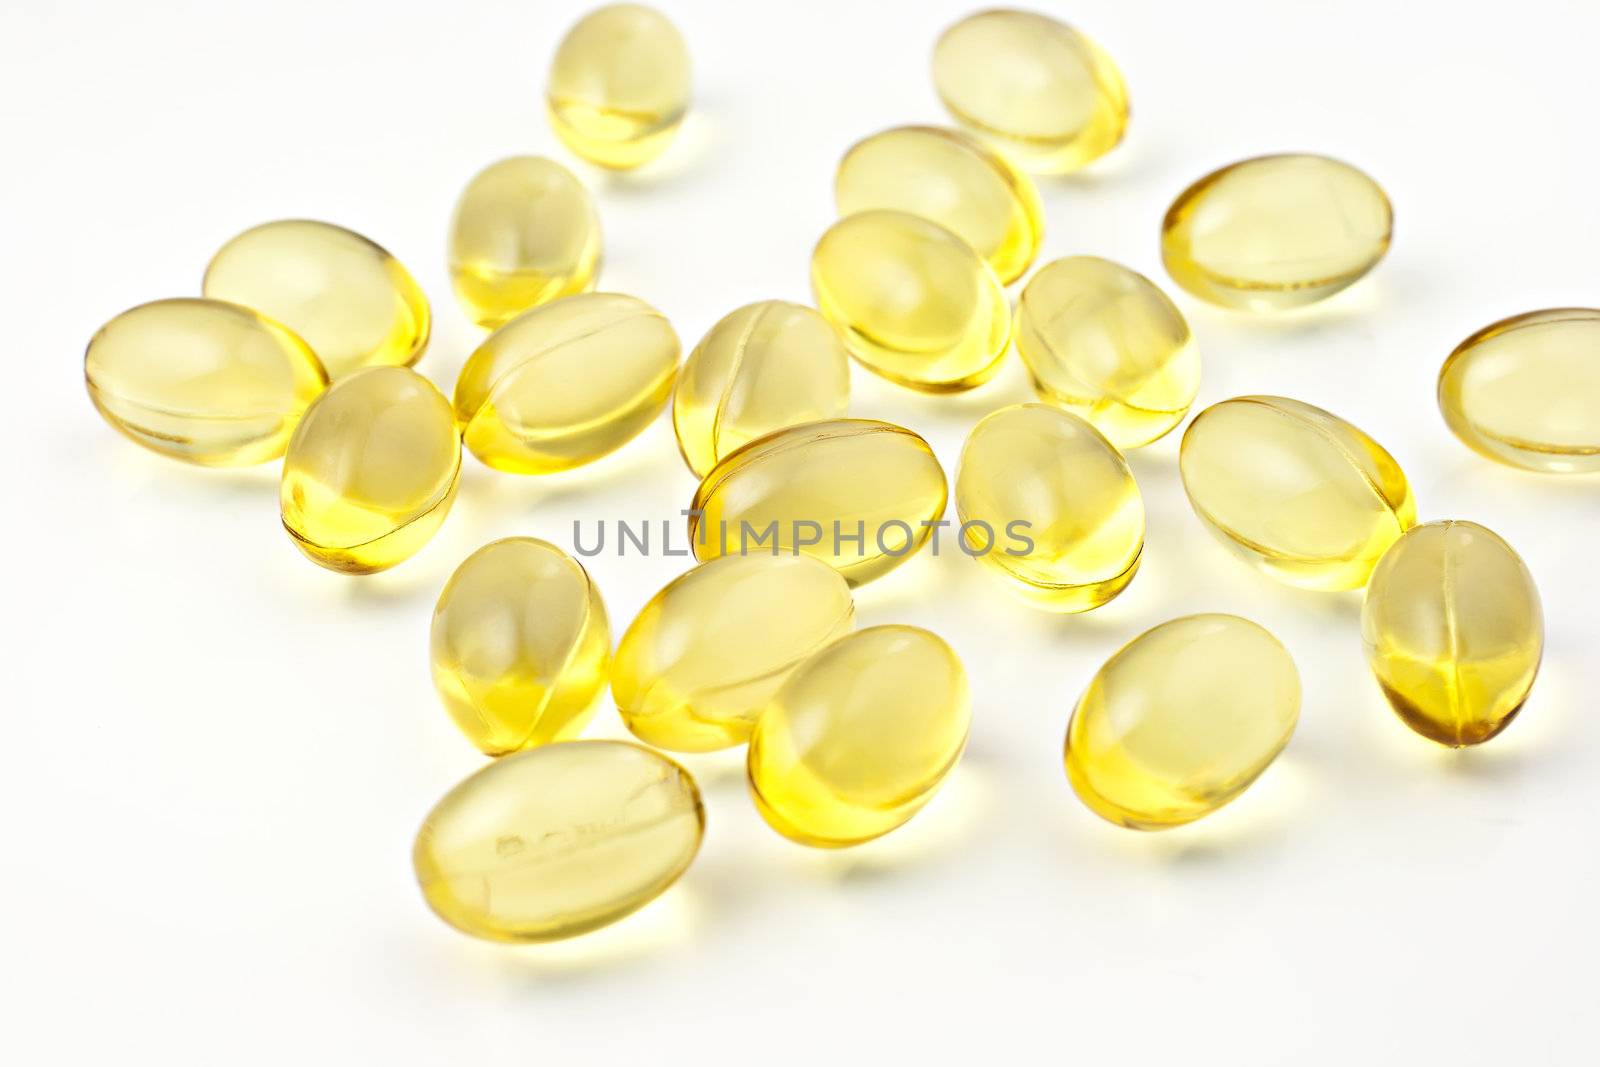 Nutritional supplement pills in warm colors and shallow depth of field. The yellow ones are vitamin E and cod liver oil.